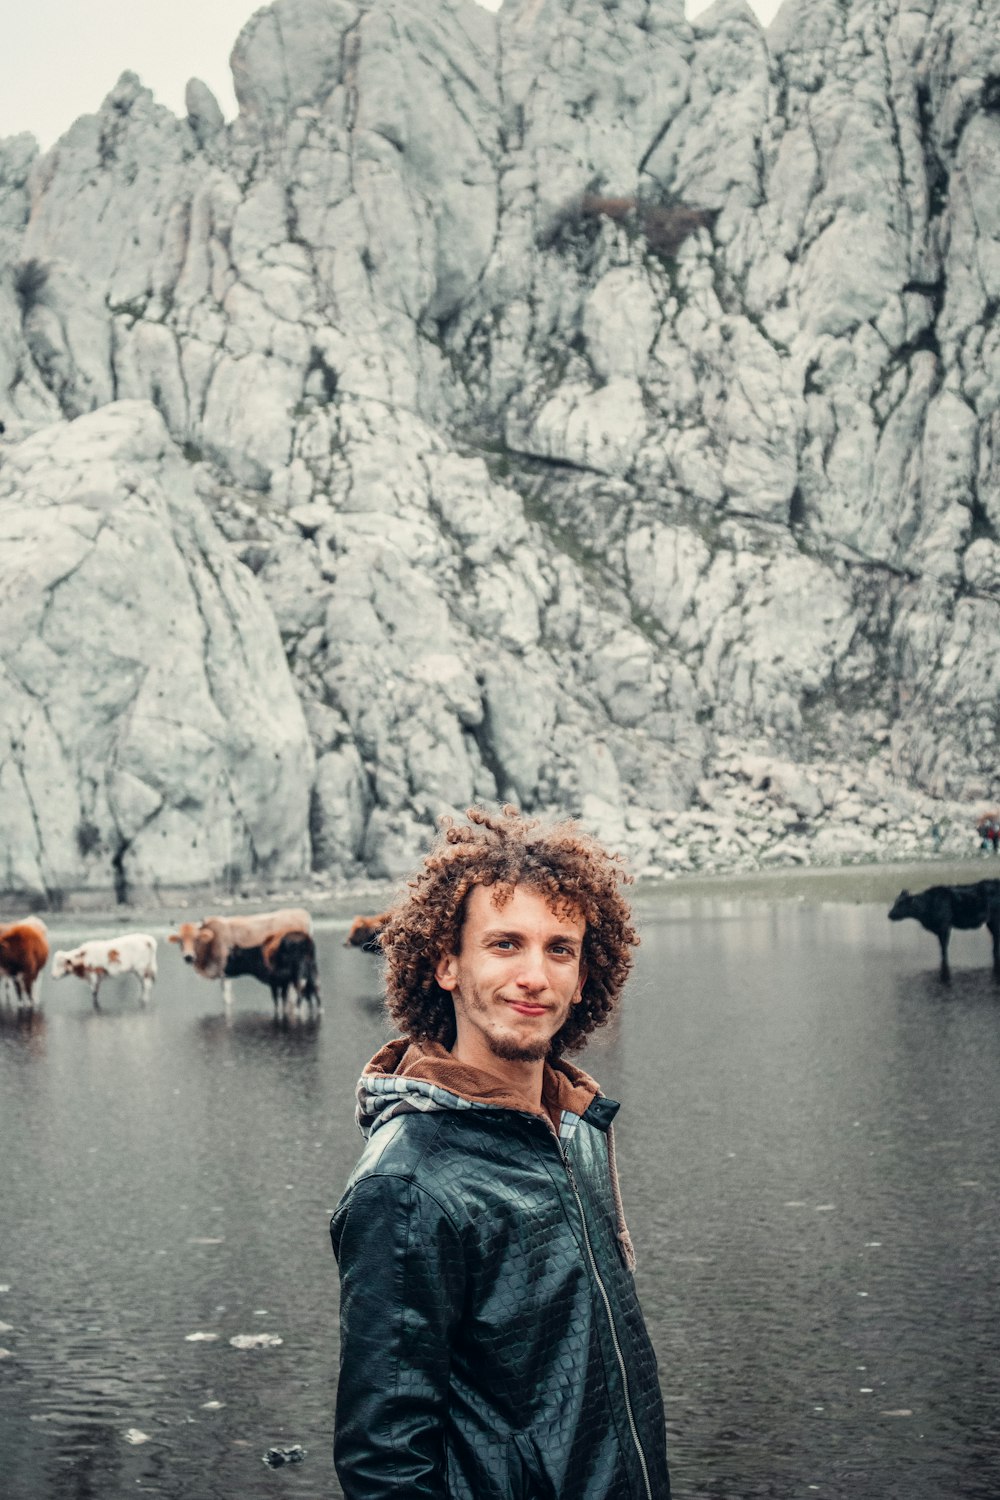 a man standing in front of a herd of cattle